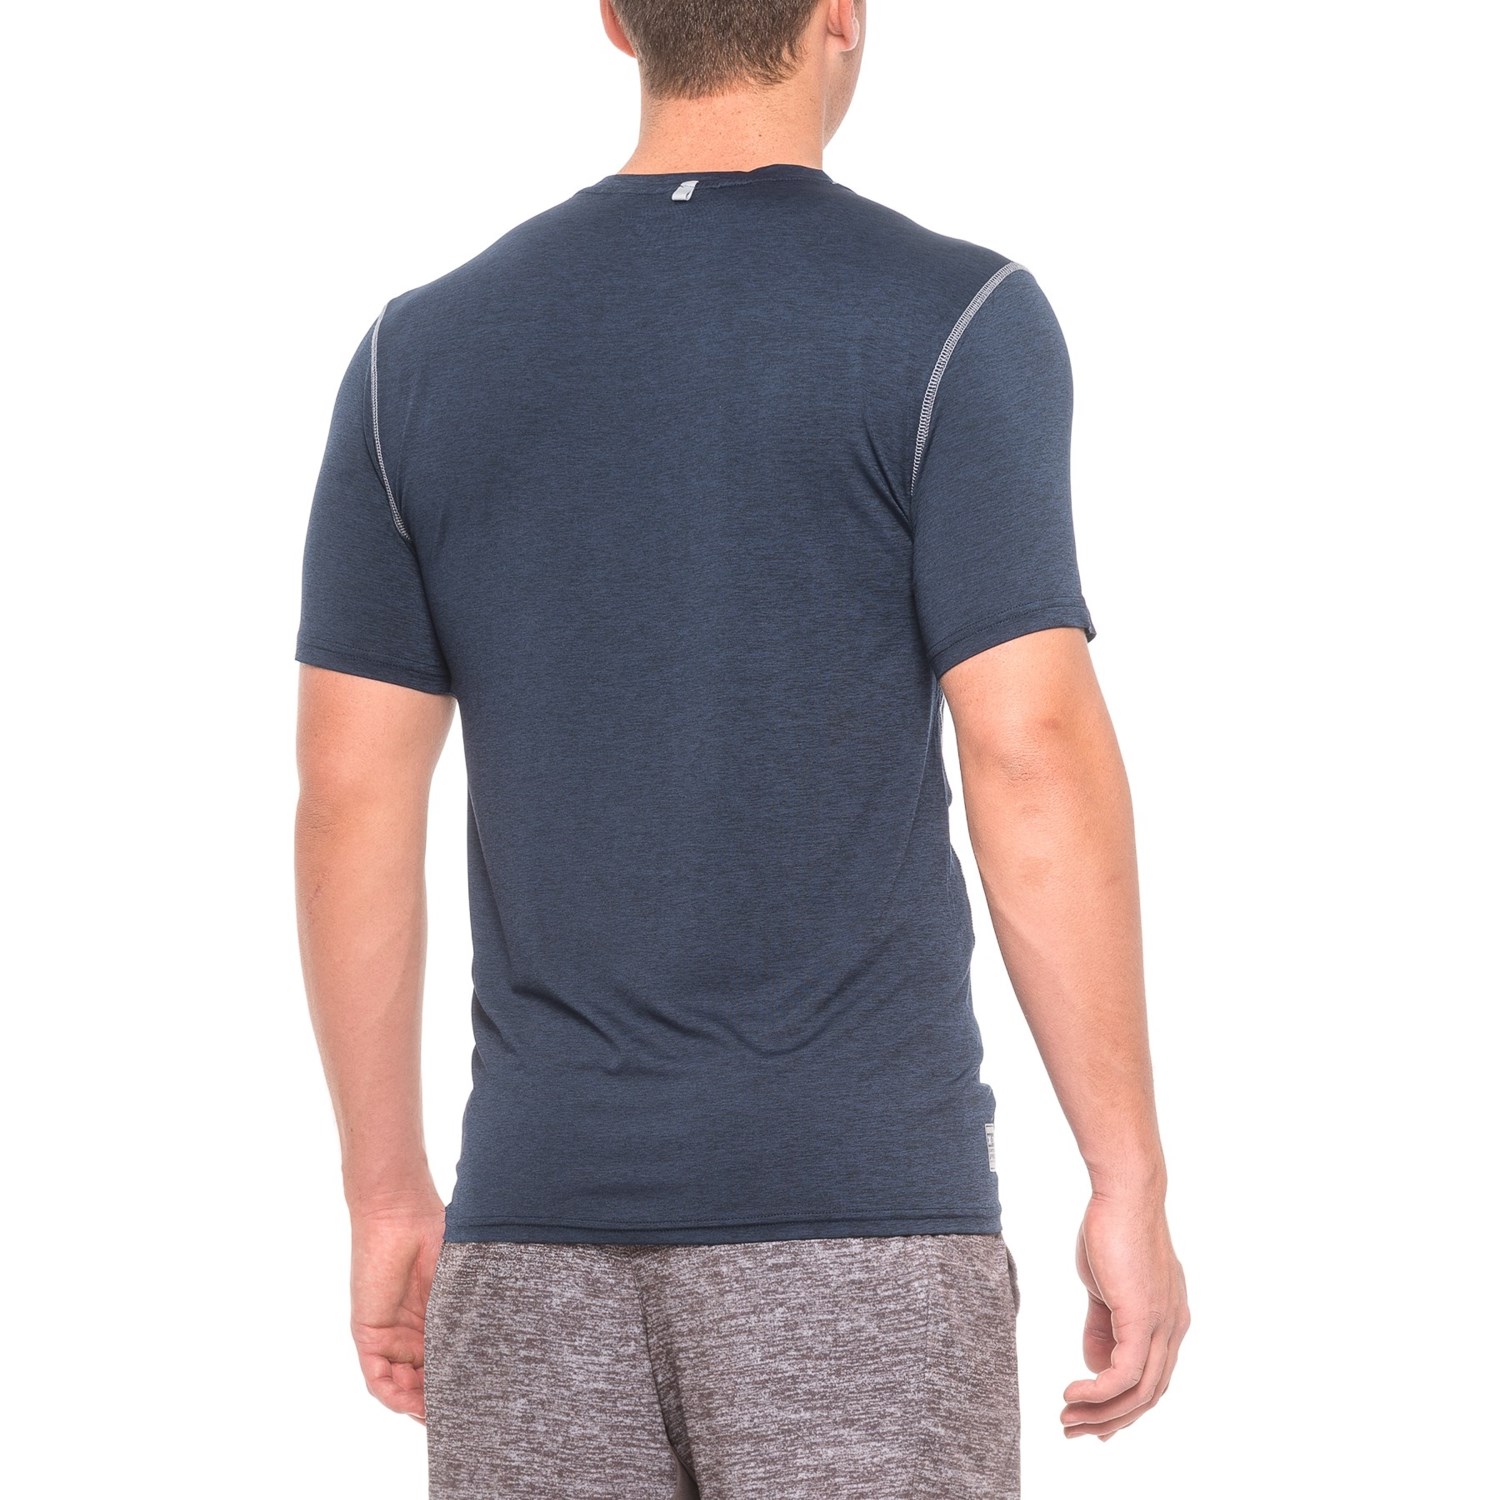 RBX X-Train Compression Pro Striated Shirt (For Men) - Save 53%